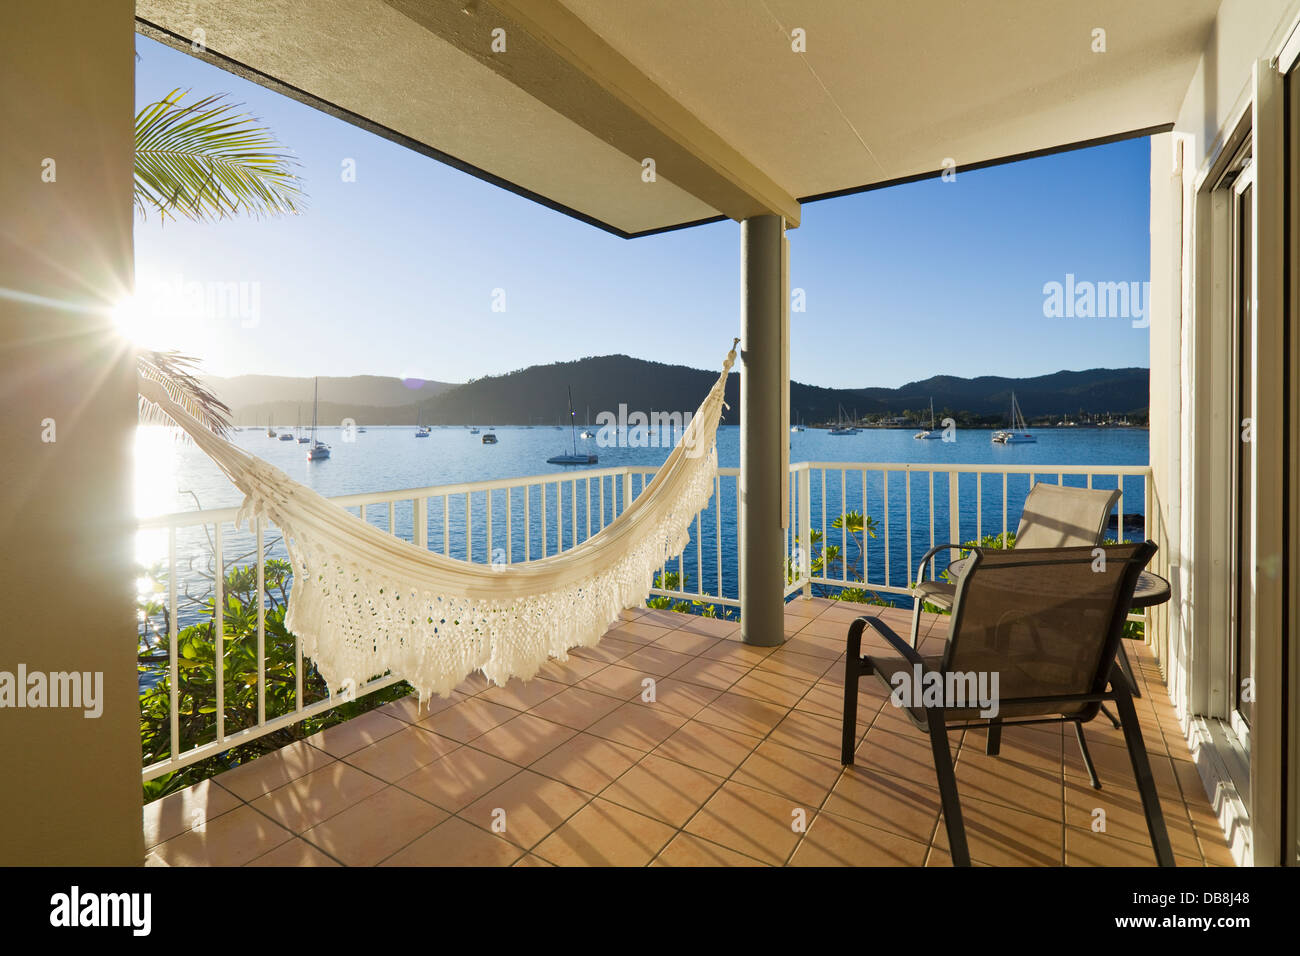 Waterfront views from the Coral Sea Resort. Airlie Beach, Whitsundays, Queensland, Australia Stock Photo